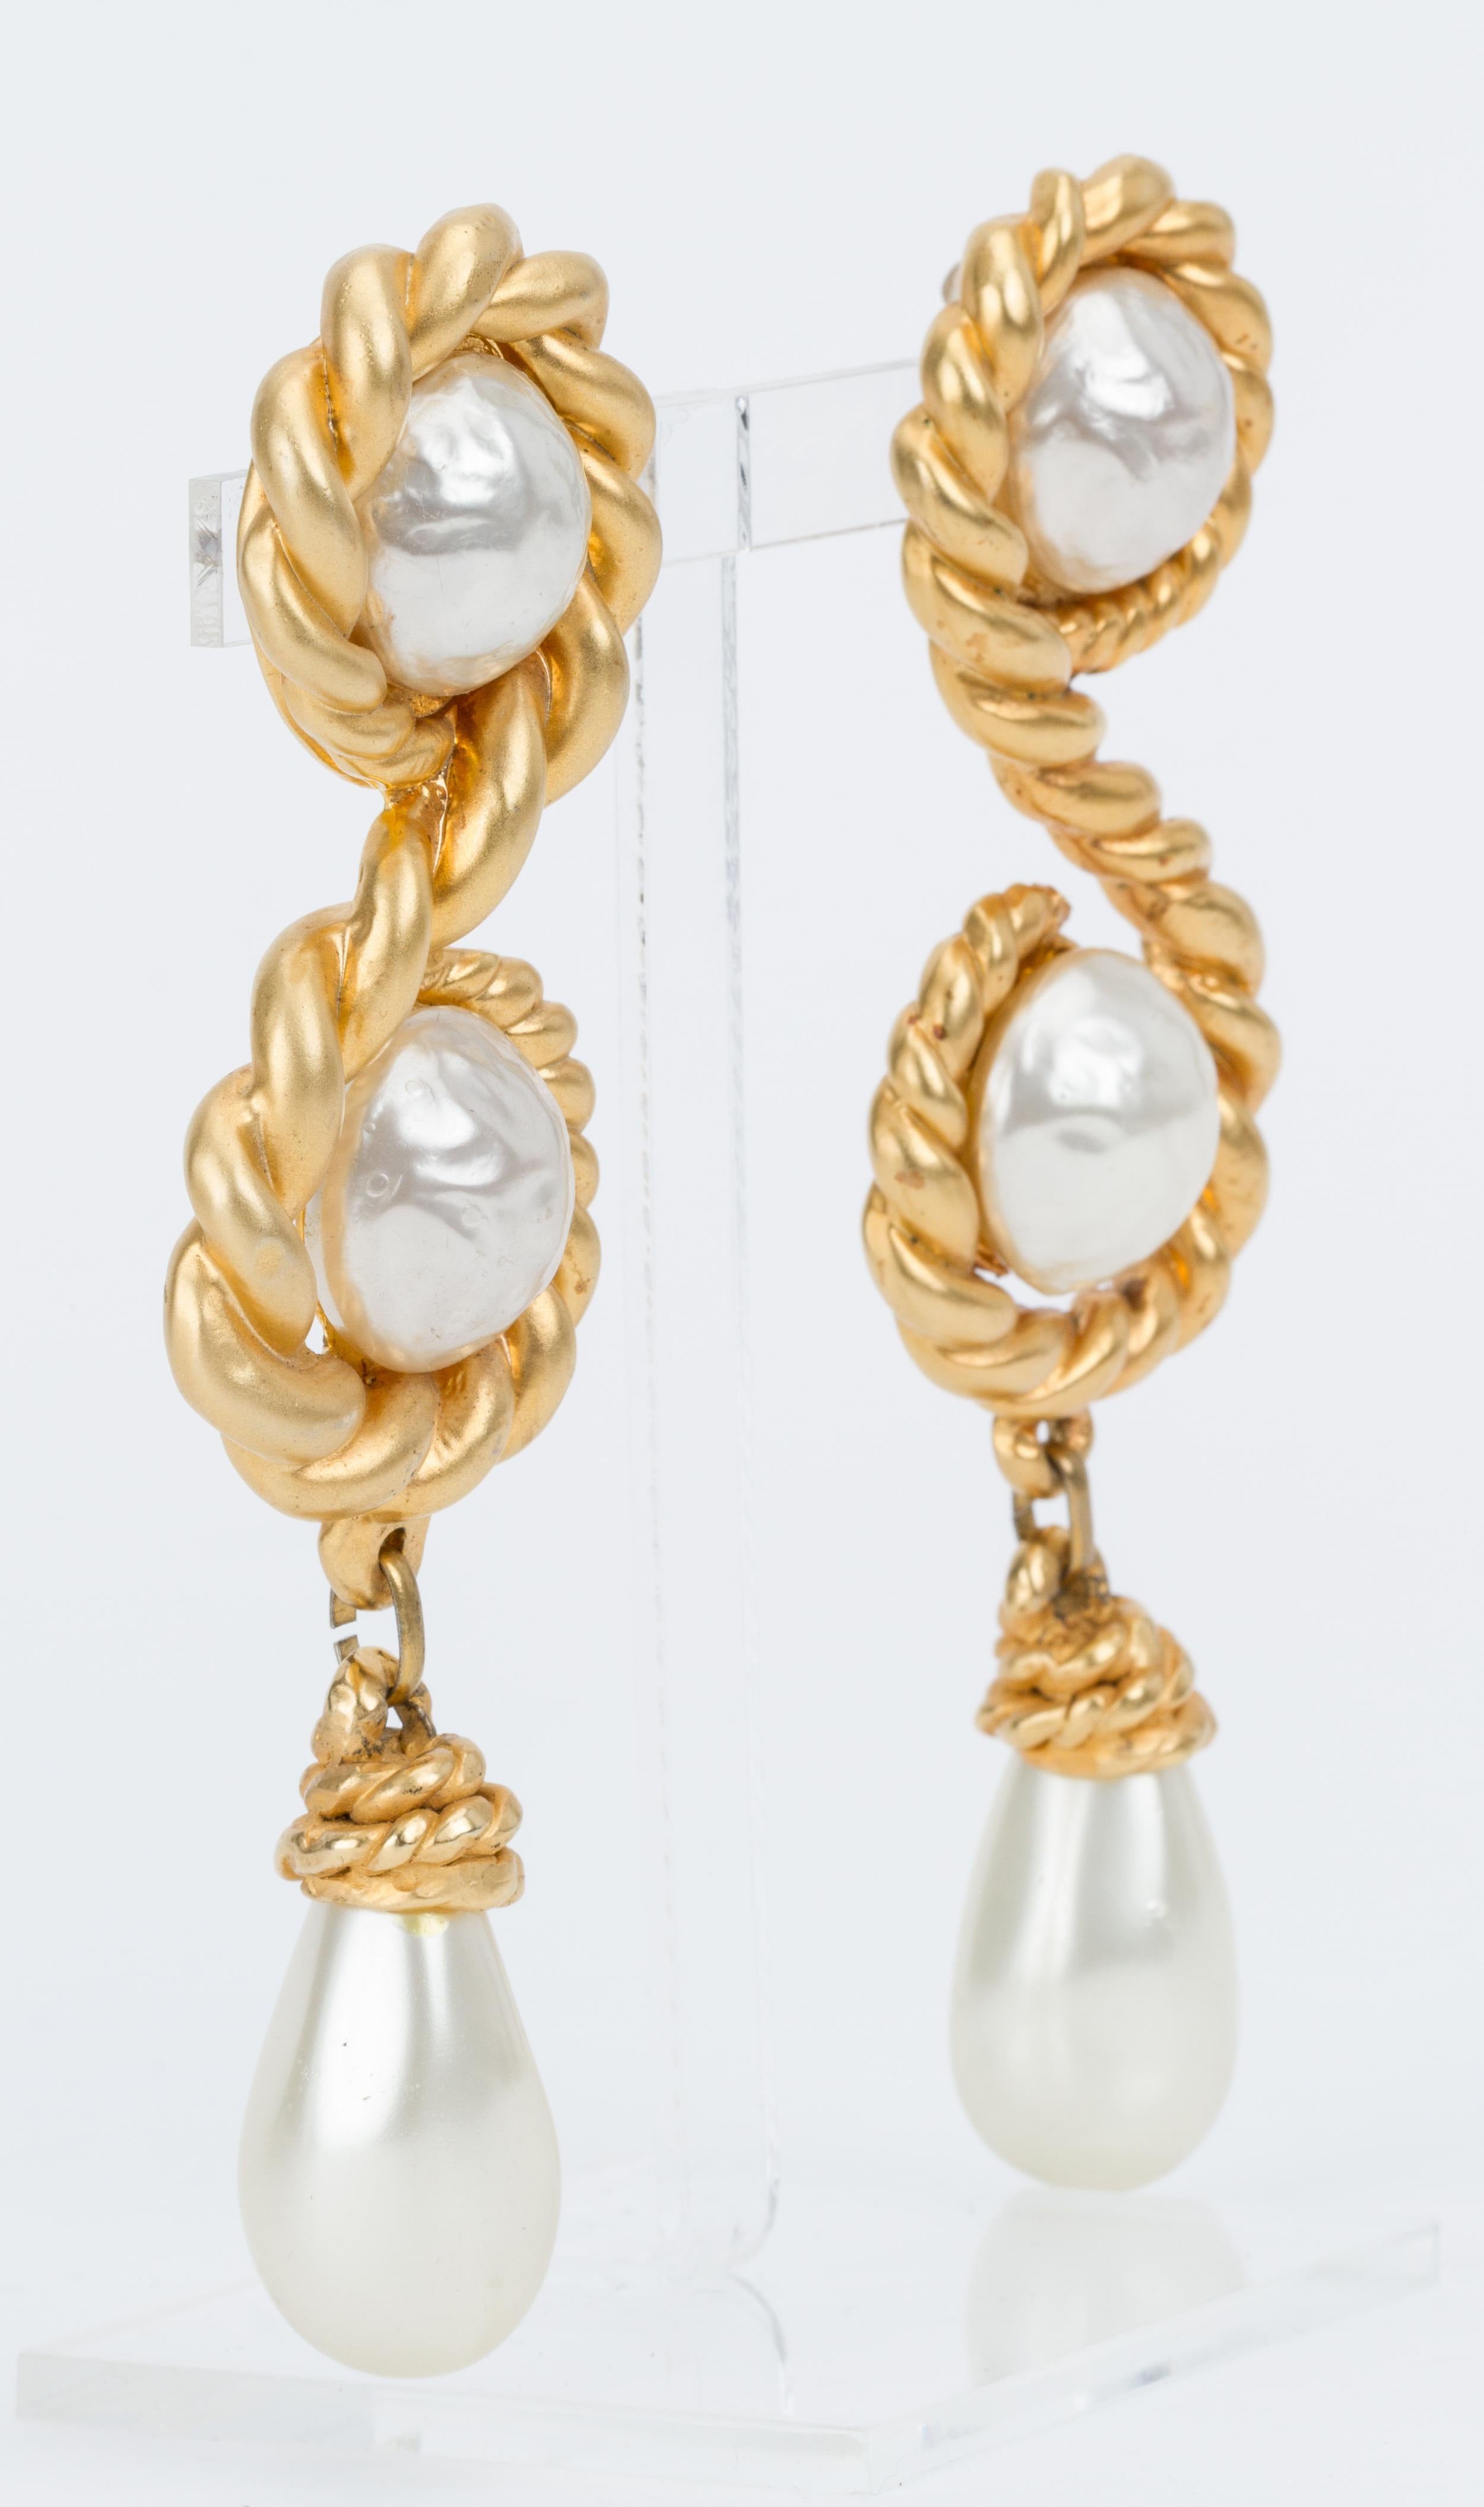 Chanel rare and collectible 70s oversized pearl drop earrings. Satin gold metal. Come with original box.